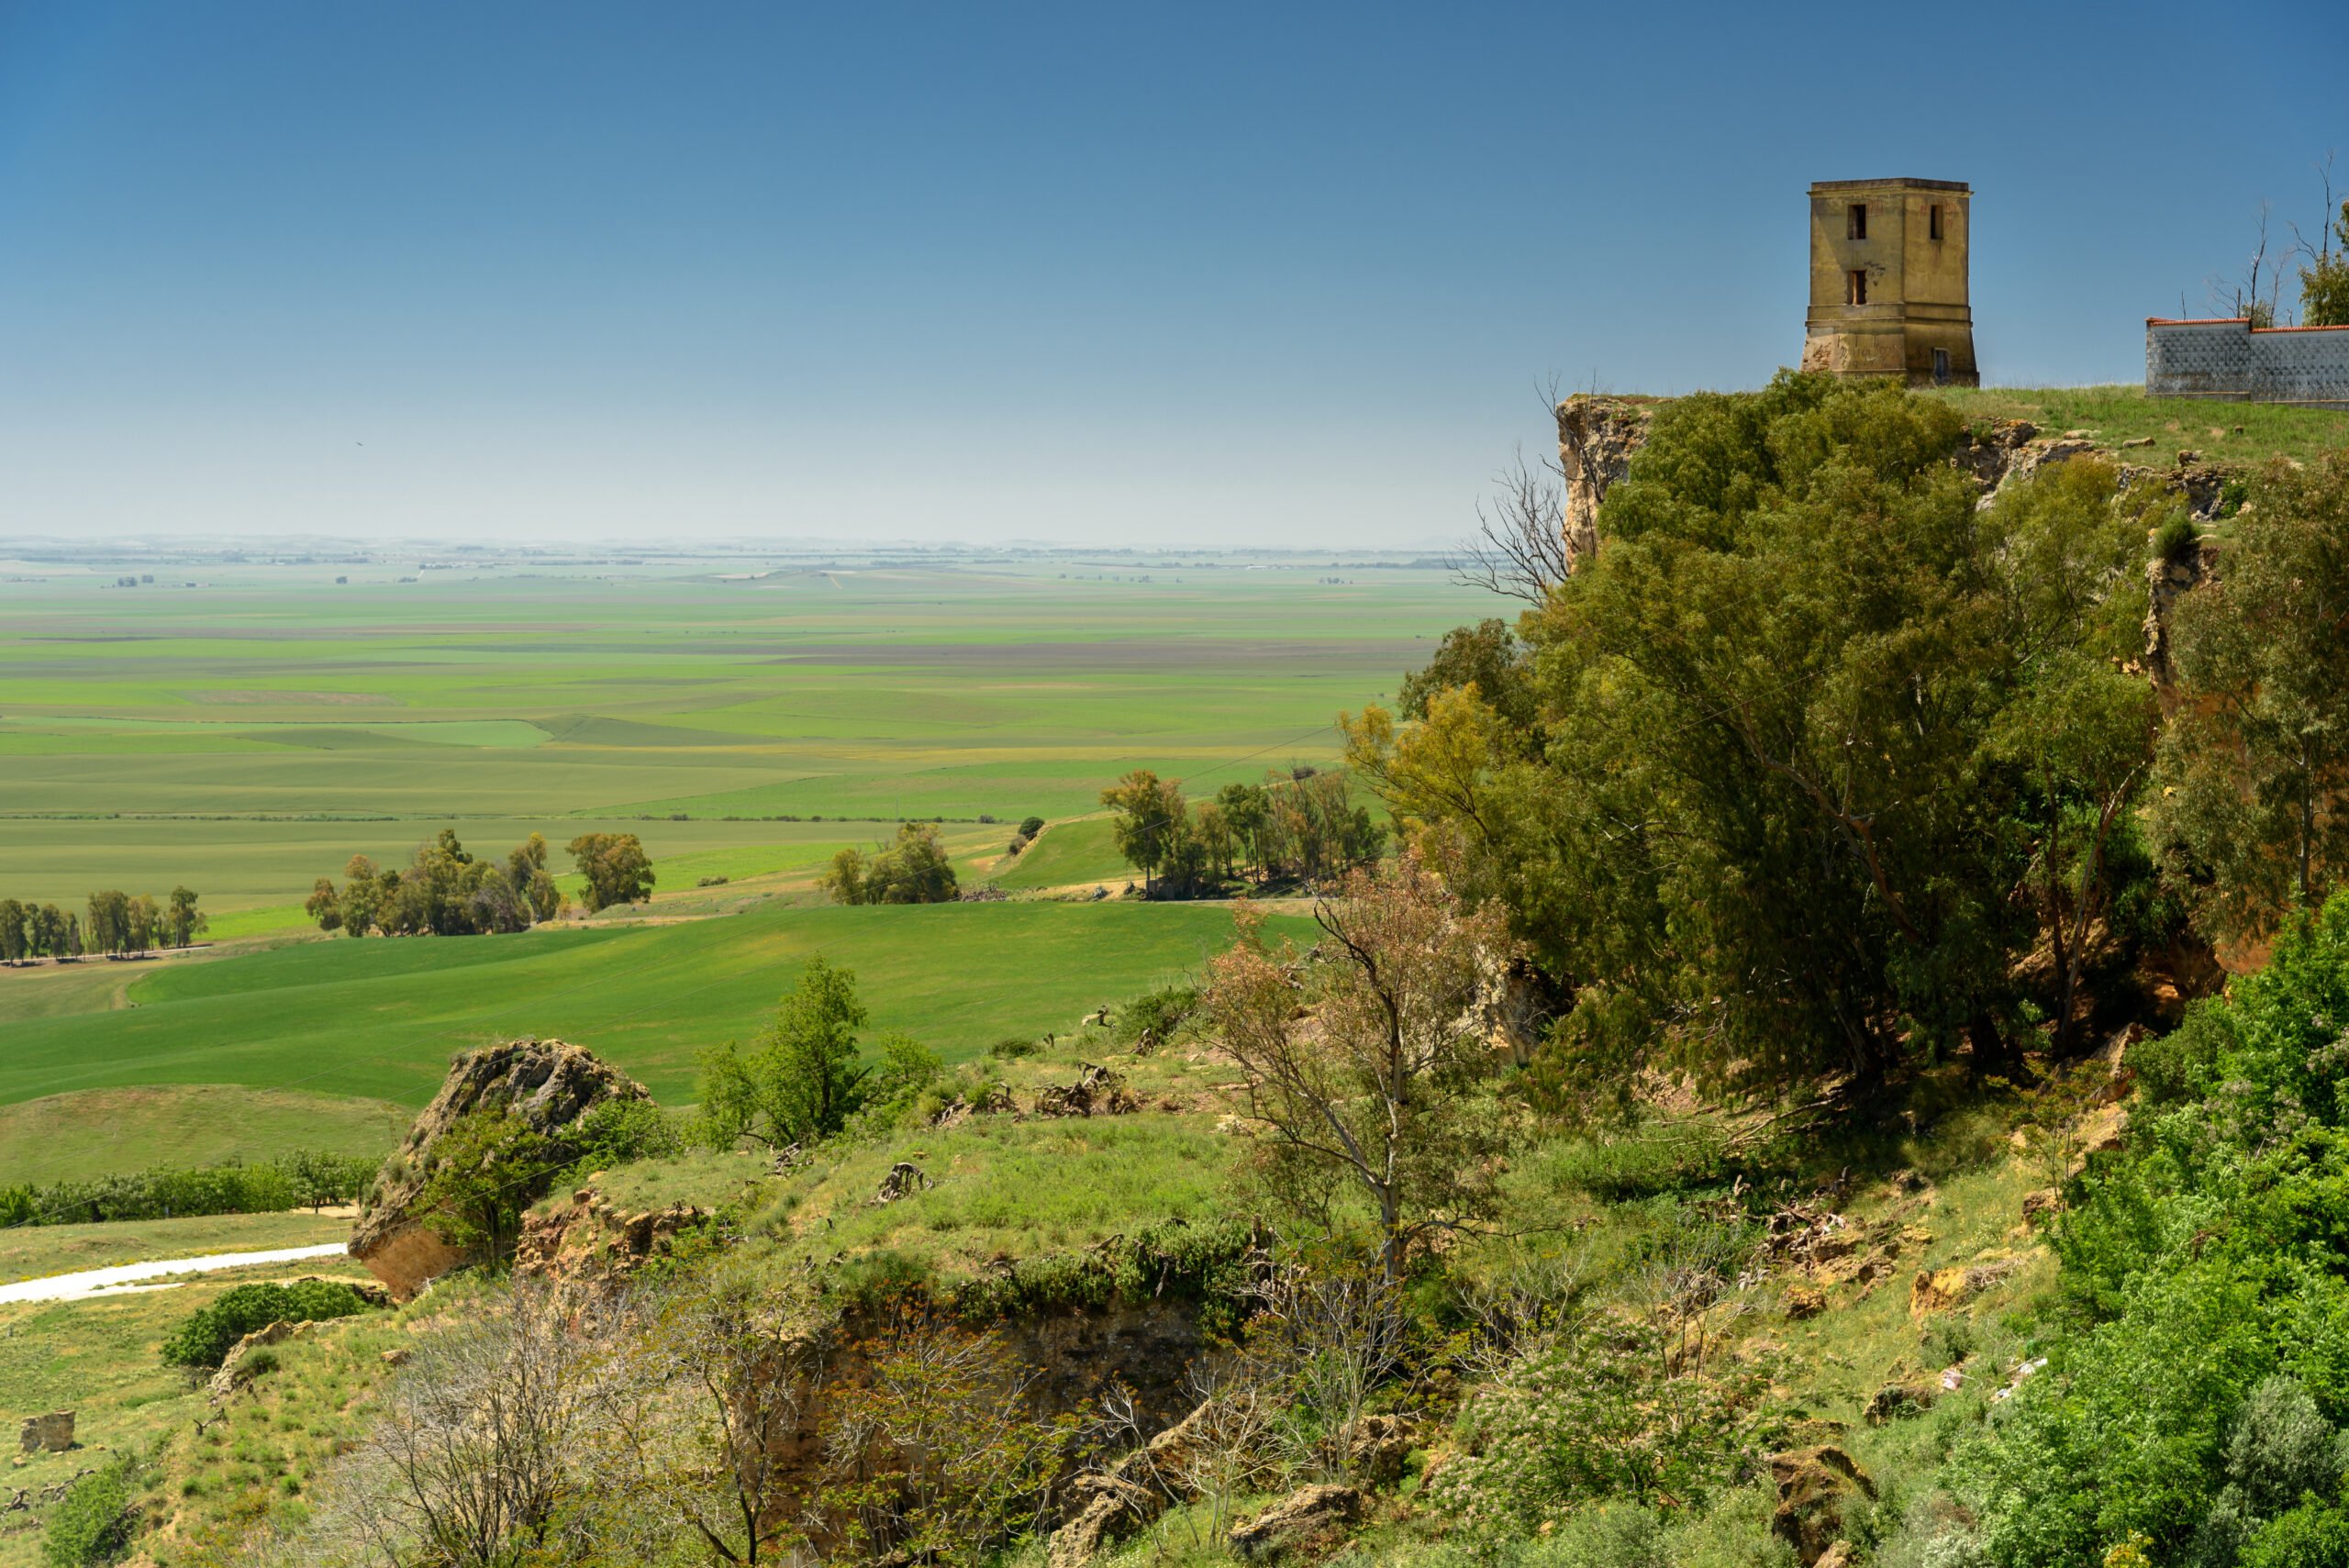 Enjoy The Beautiful Landscapes Of Carmona Village On The Olive Oil Tasting & Carmona Village Tour From Seville